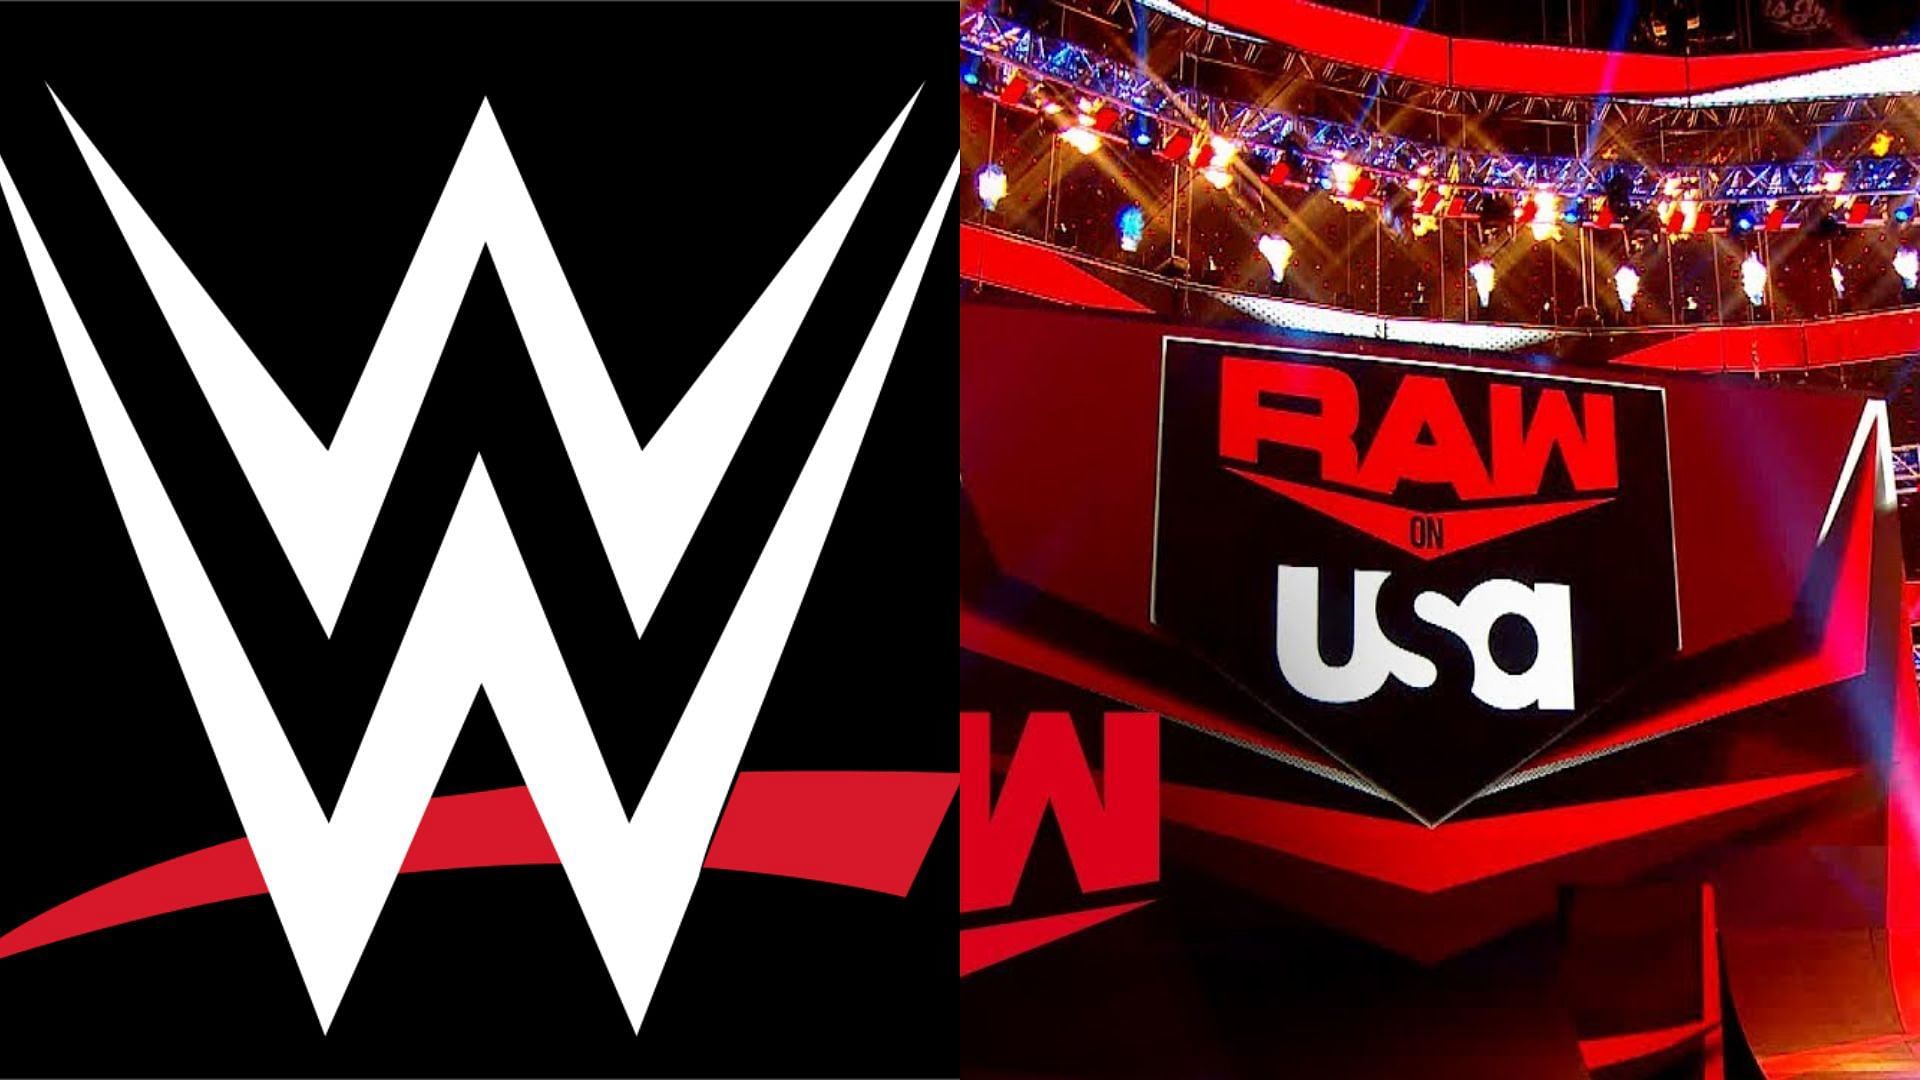 WWE RAW aired its latest episode from San Antonio